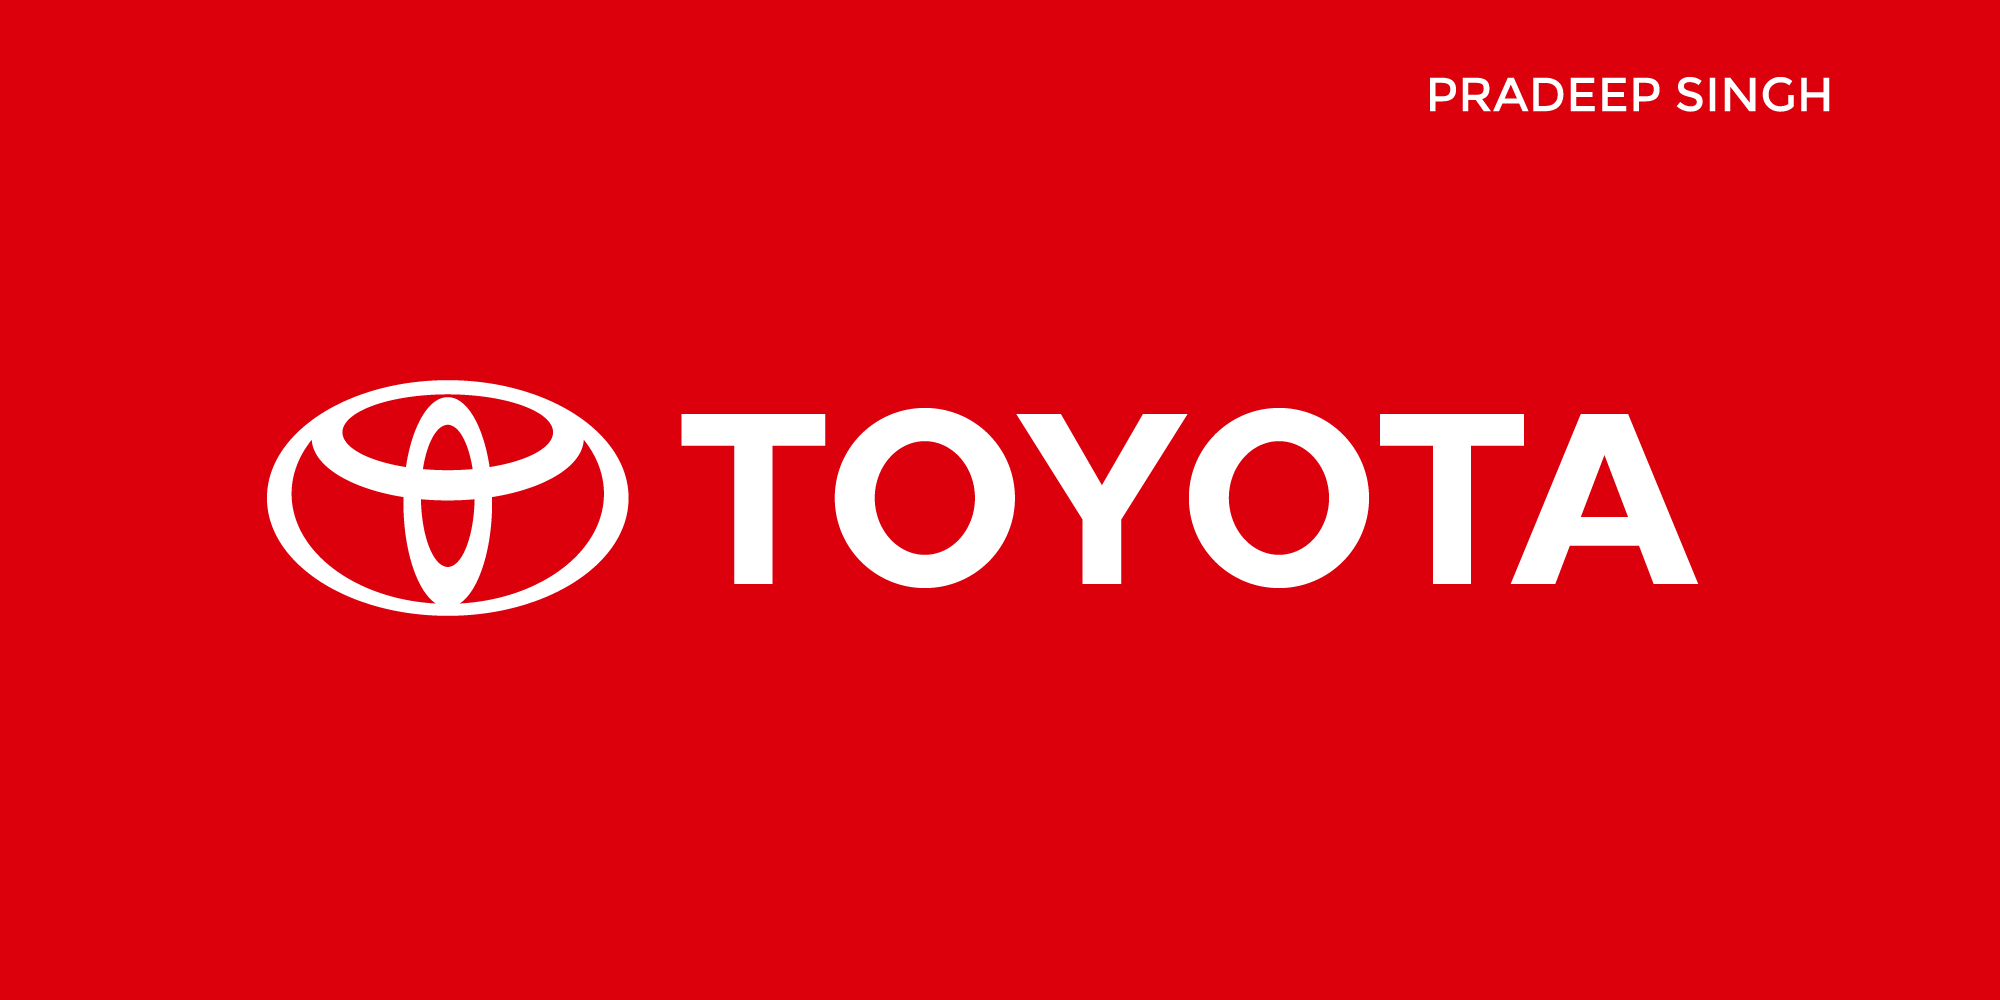 Toyota Business Strategy Operations Management